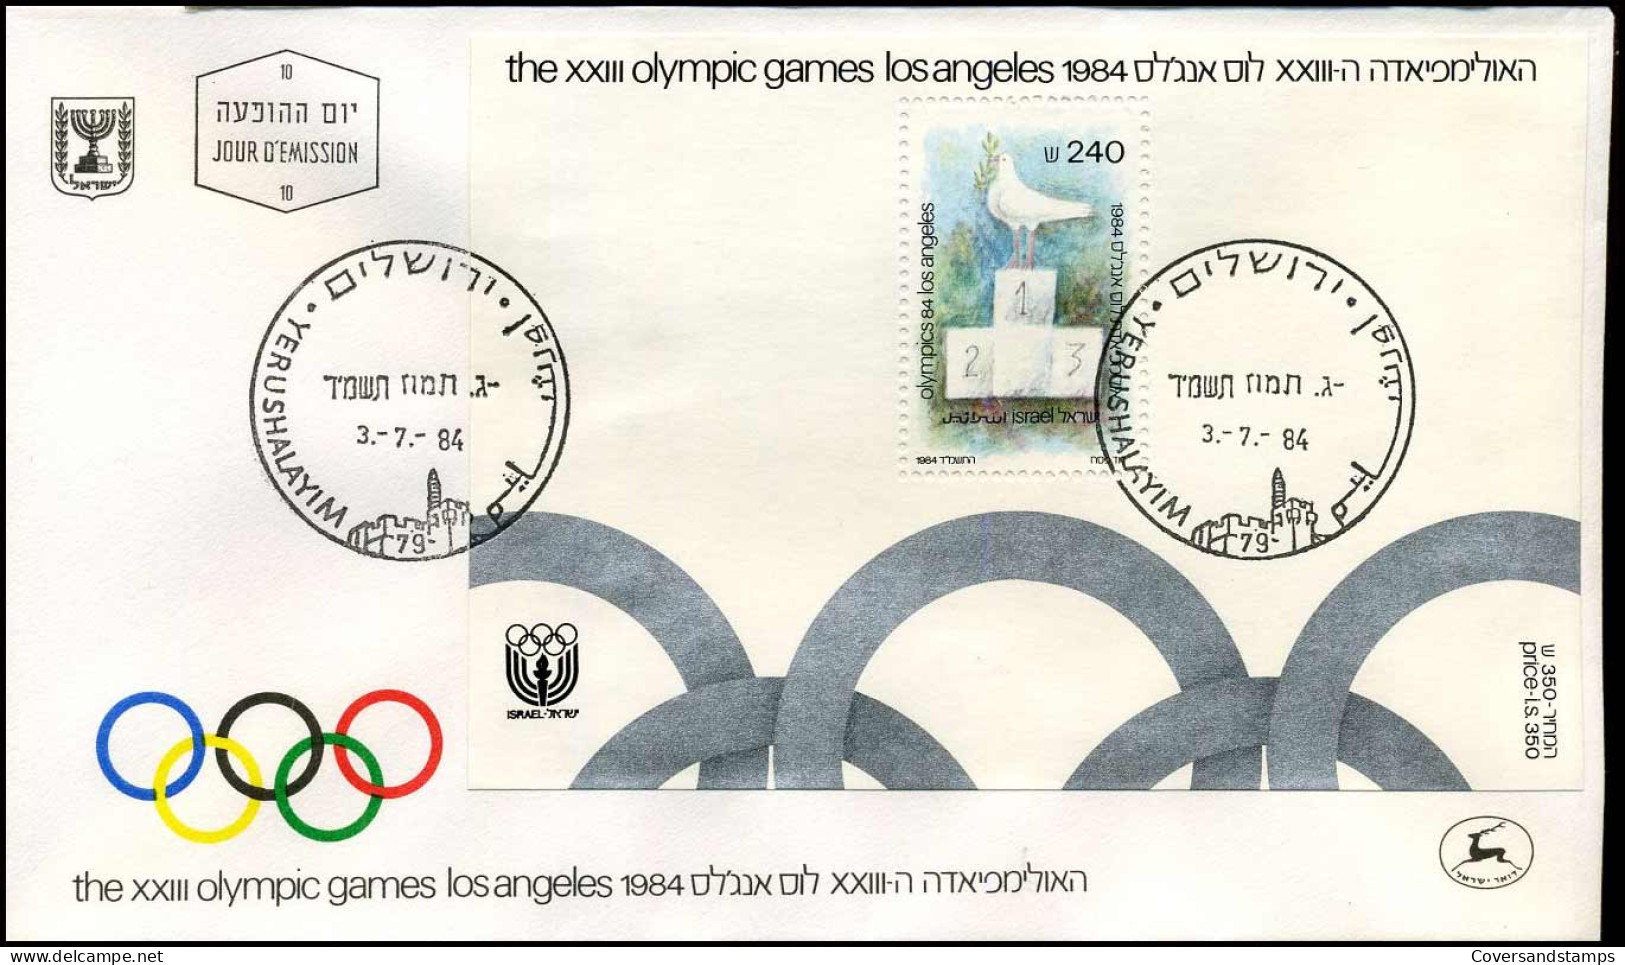 FDC - The XXIII Olympic Games Los Angeles 1984 - FDC